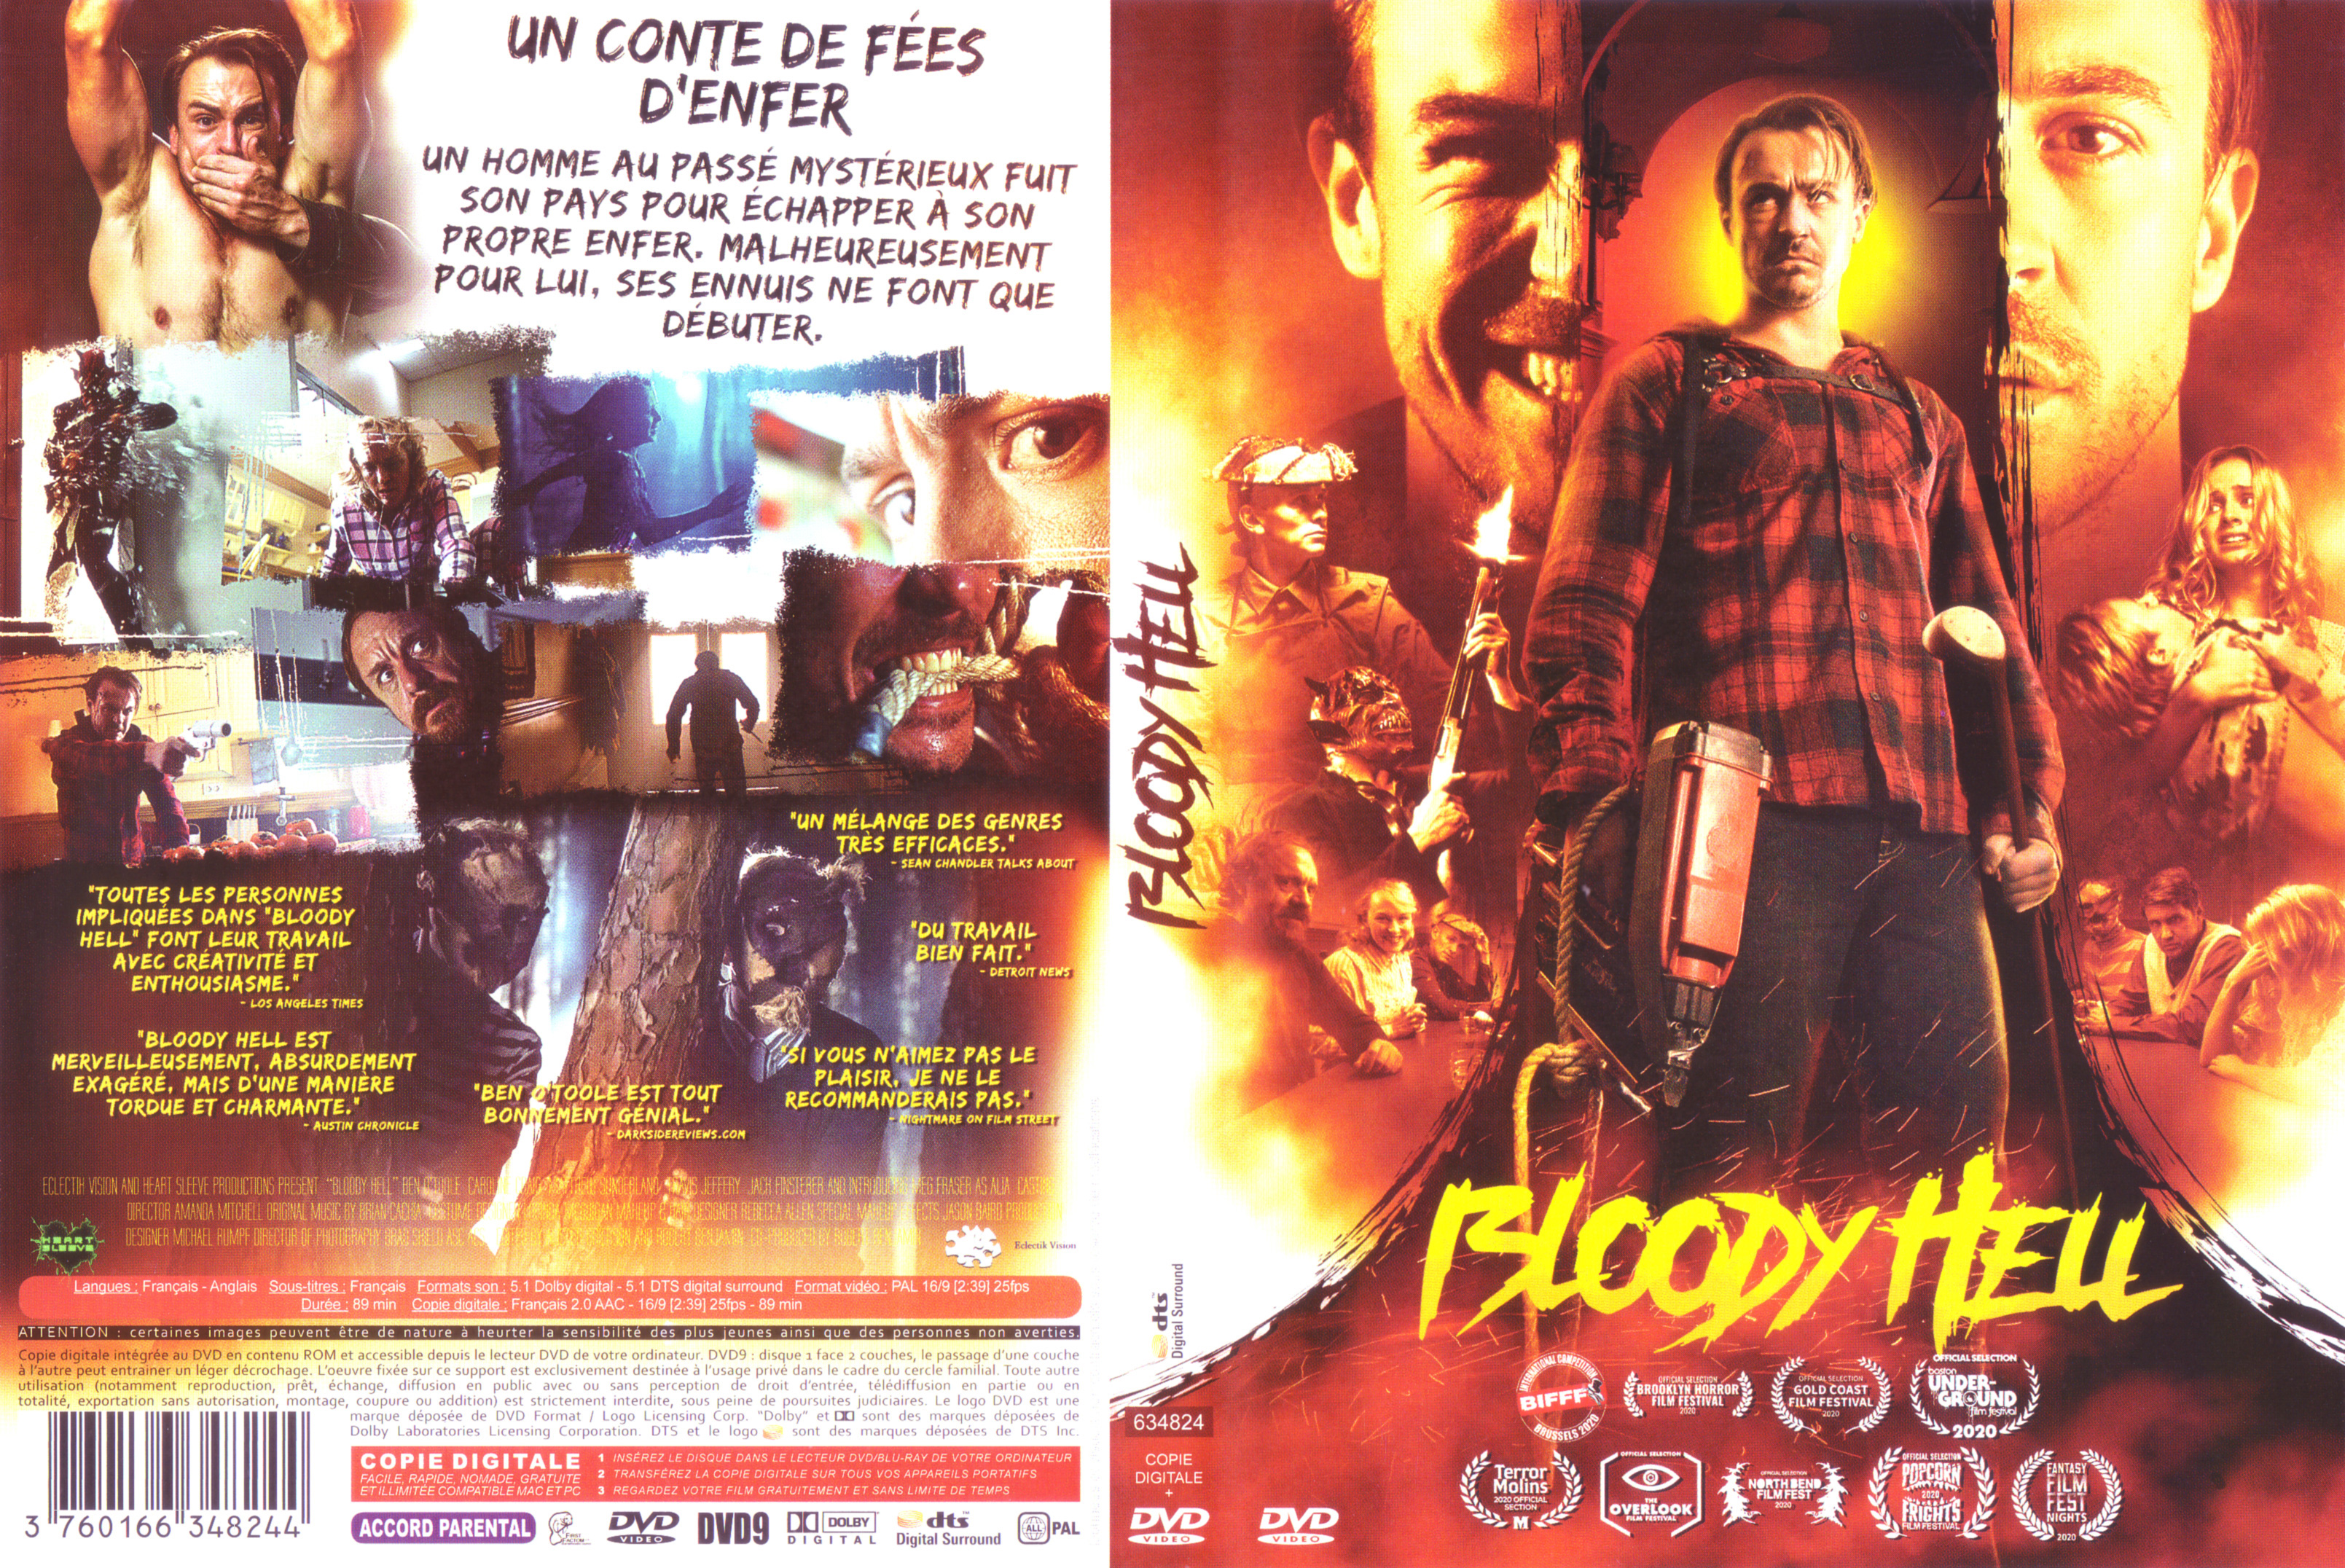 Jaquette DVD Bloody hell